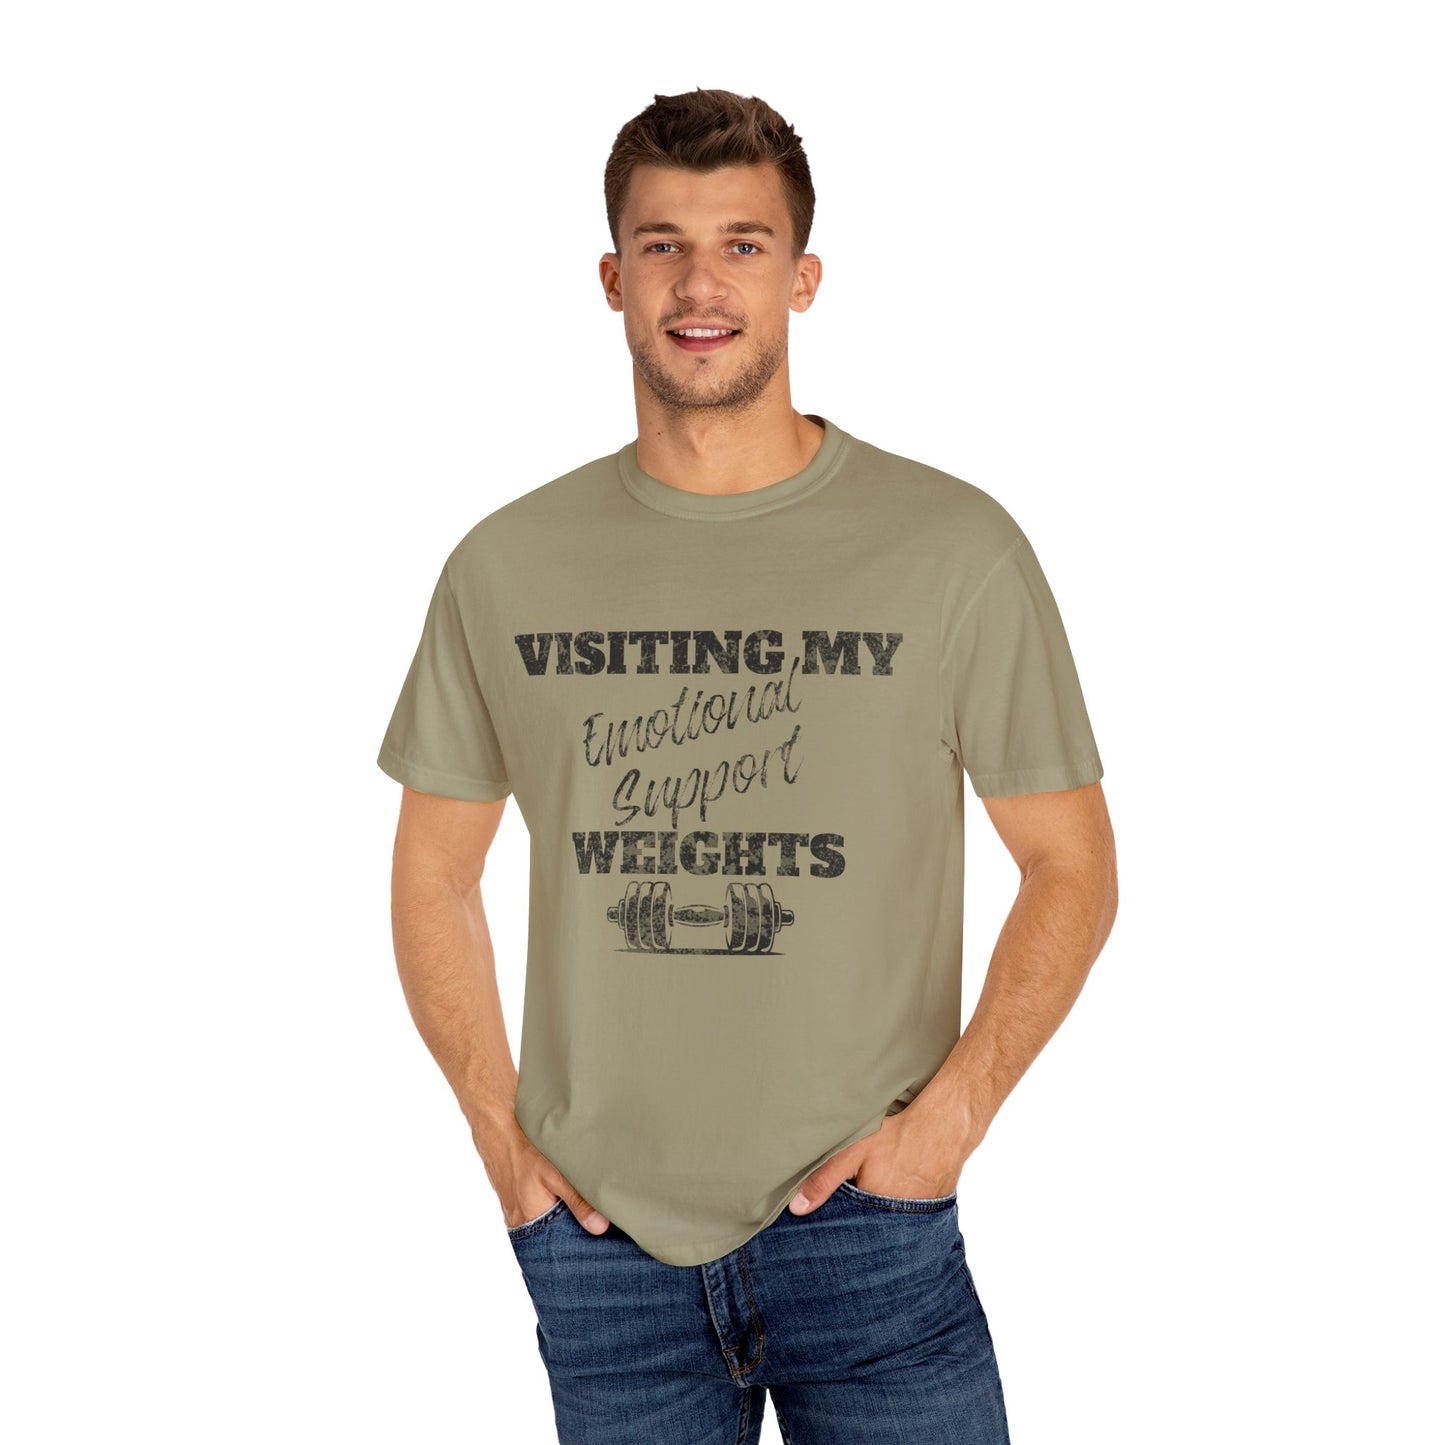 Emotional Support Weights Unisex Garment-Dyed T-shirt